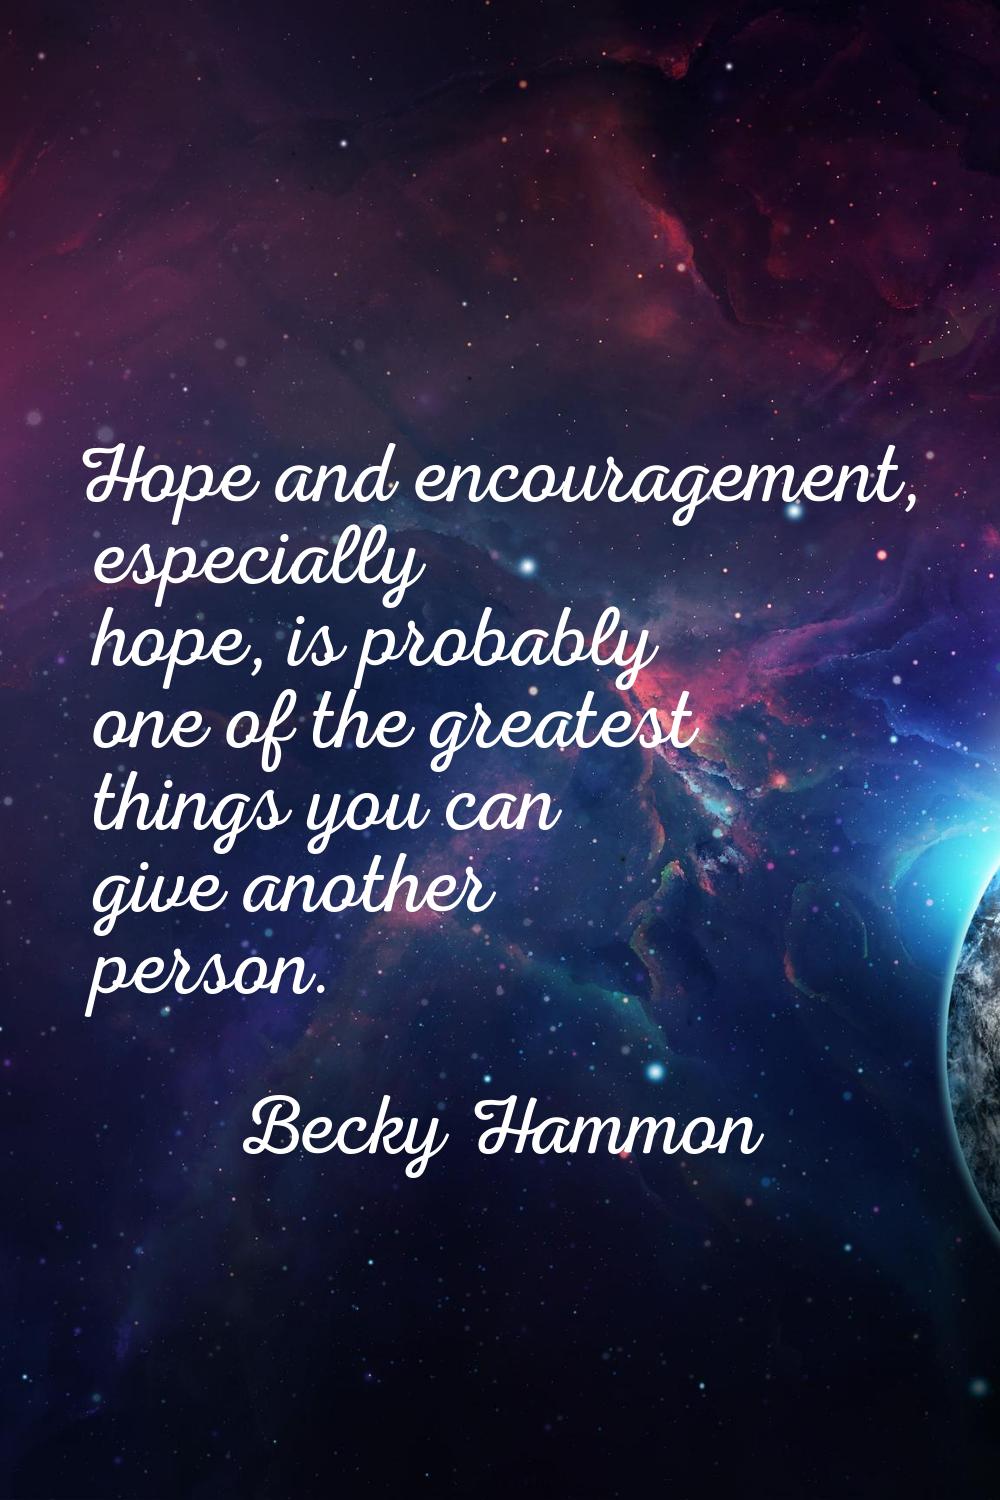 Hope and encouragement, especially hope, is probably one of the greatest things you can give anothe